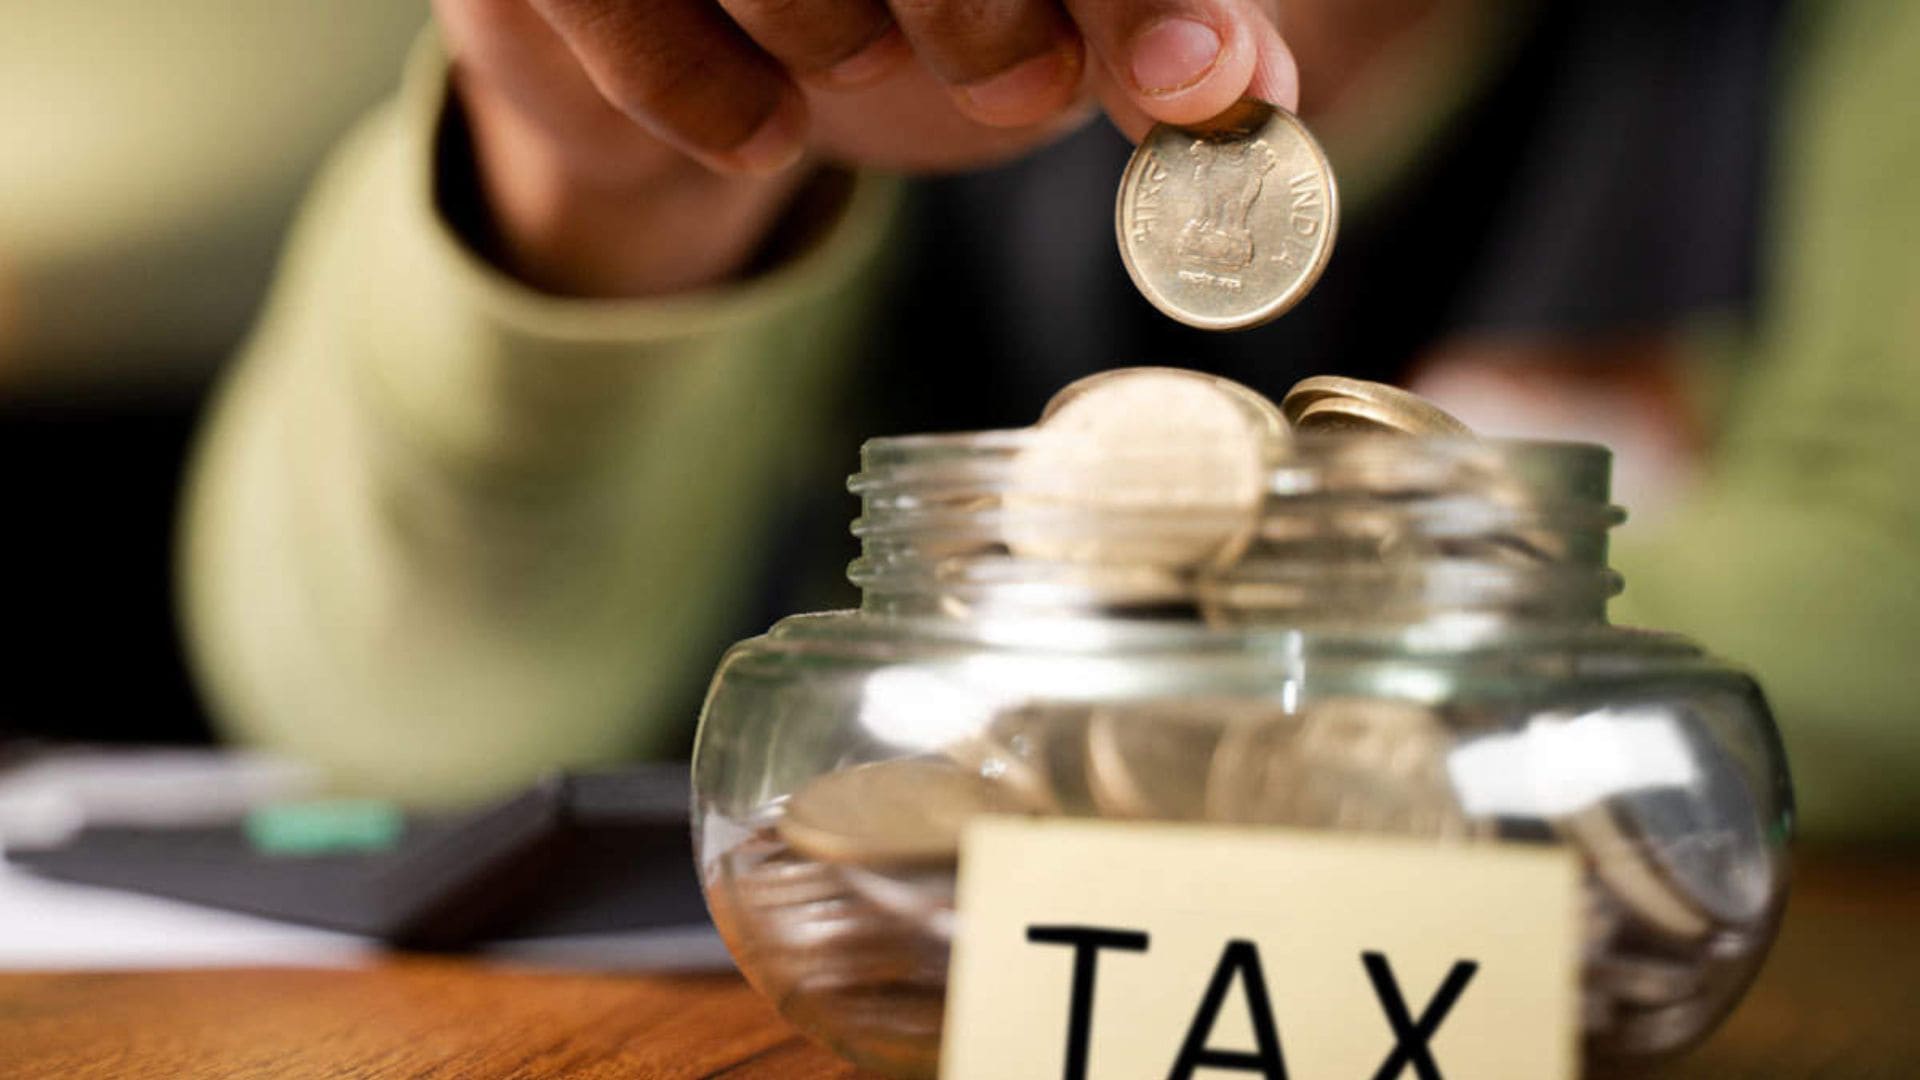 8 Safest Ways to Save Tax Legally? - Viral Bake